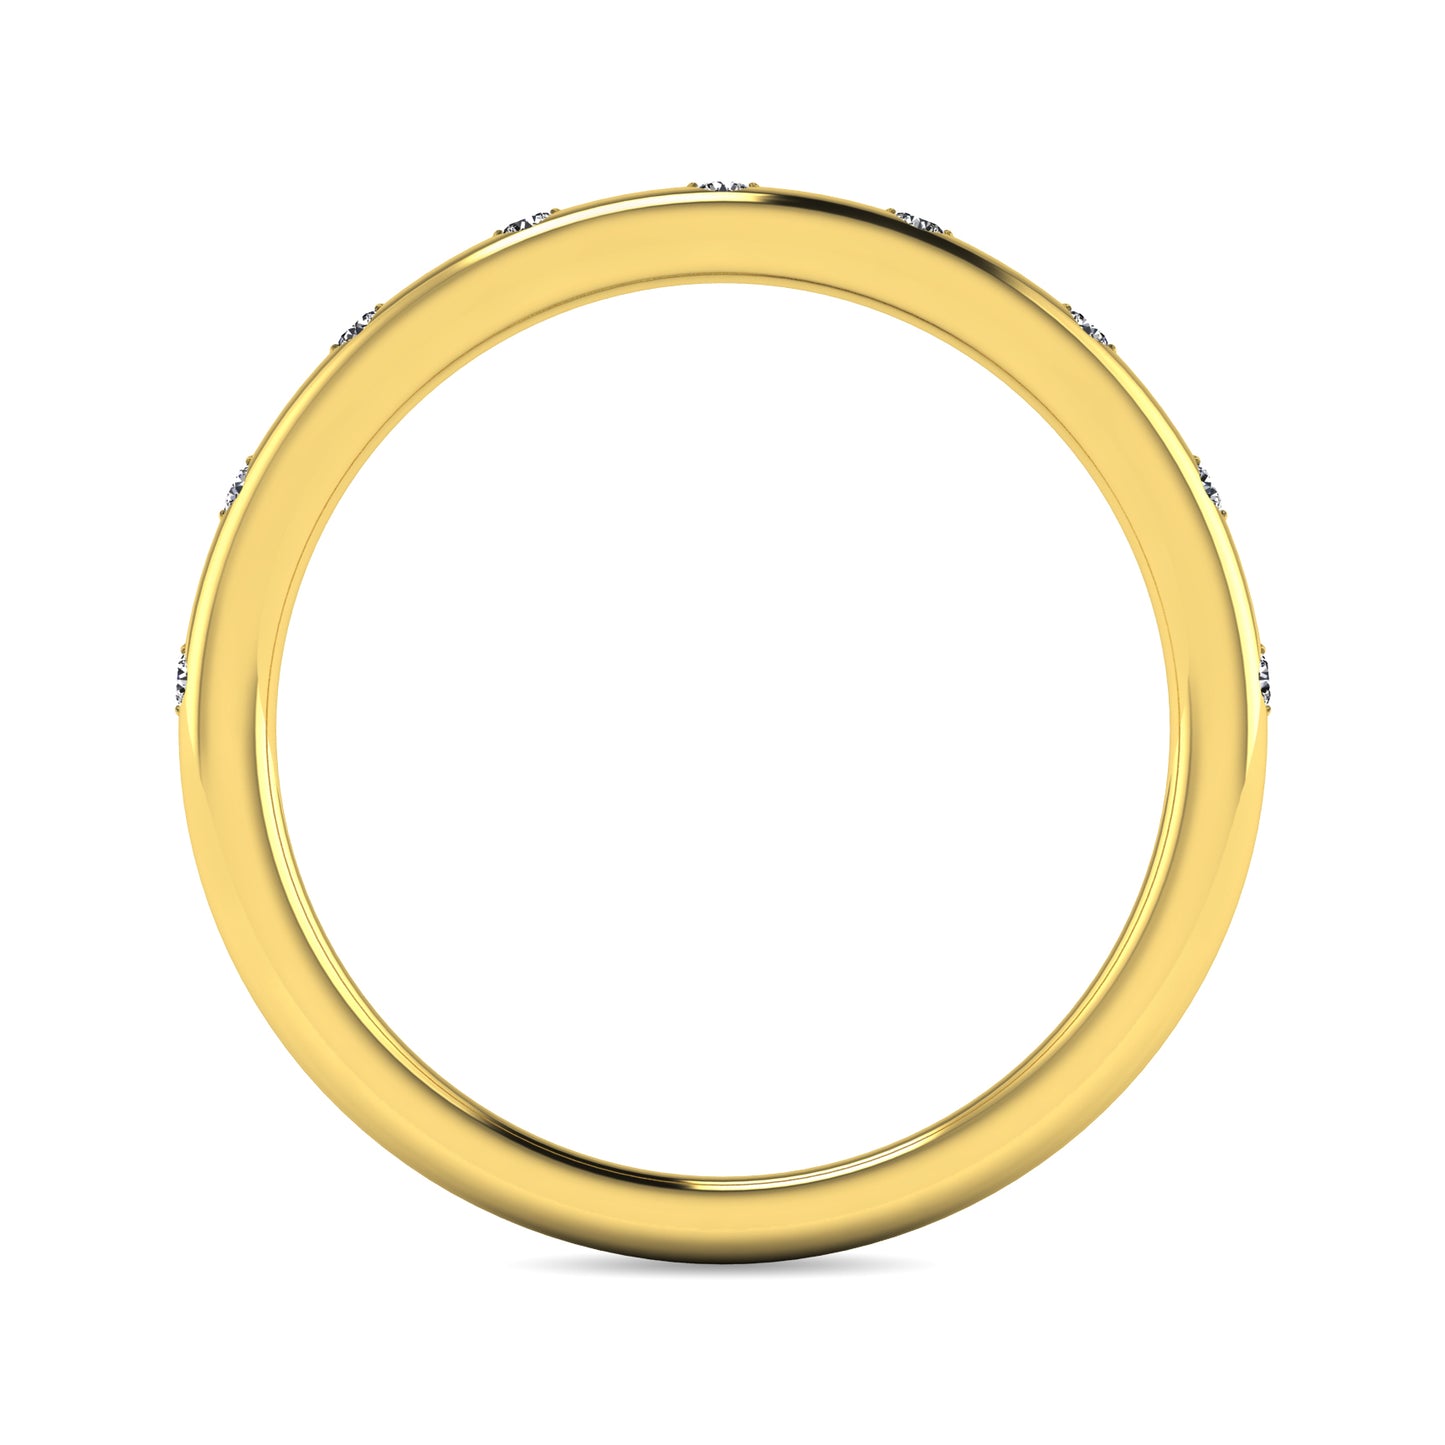 Diamond 1/10 ct tw Stackable Ring in 10K Yellow Gold